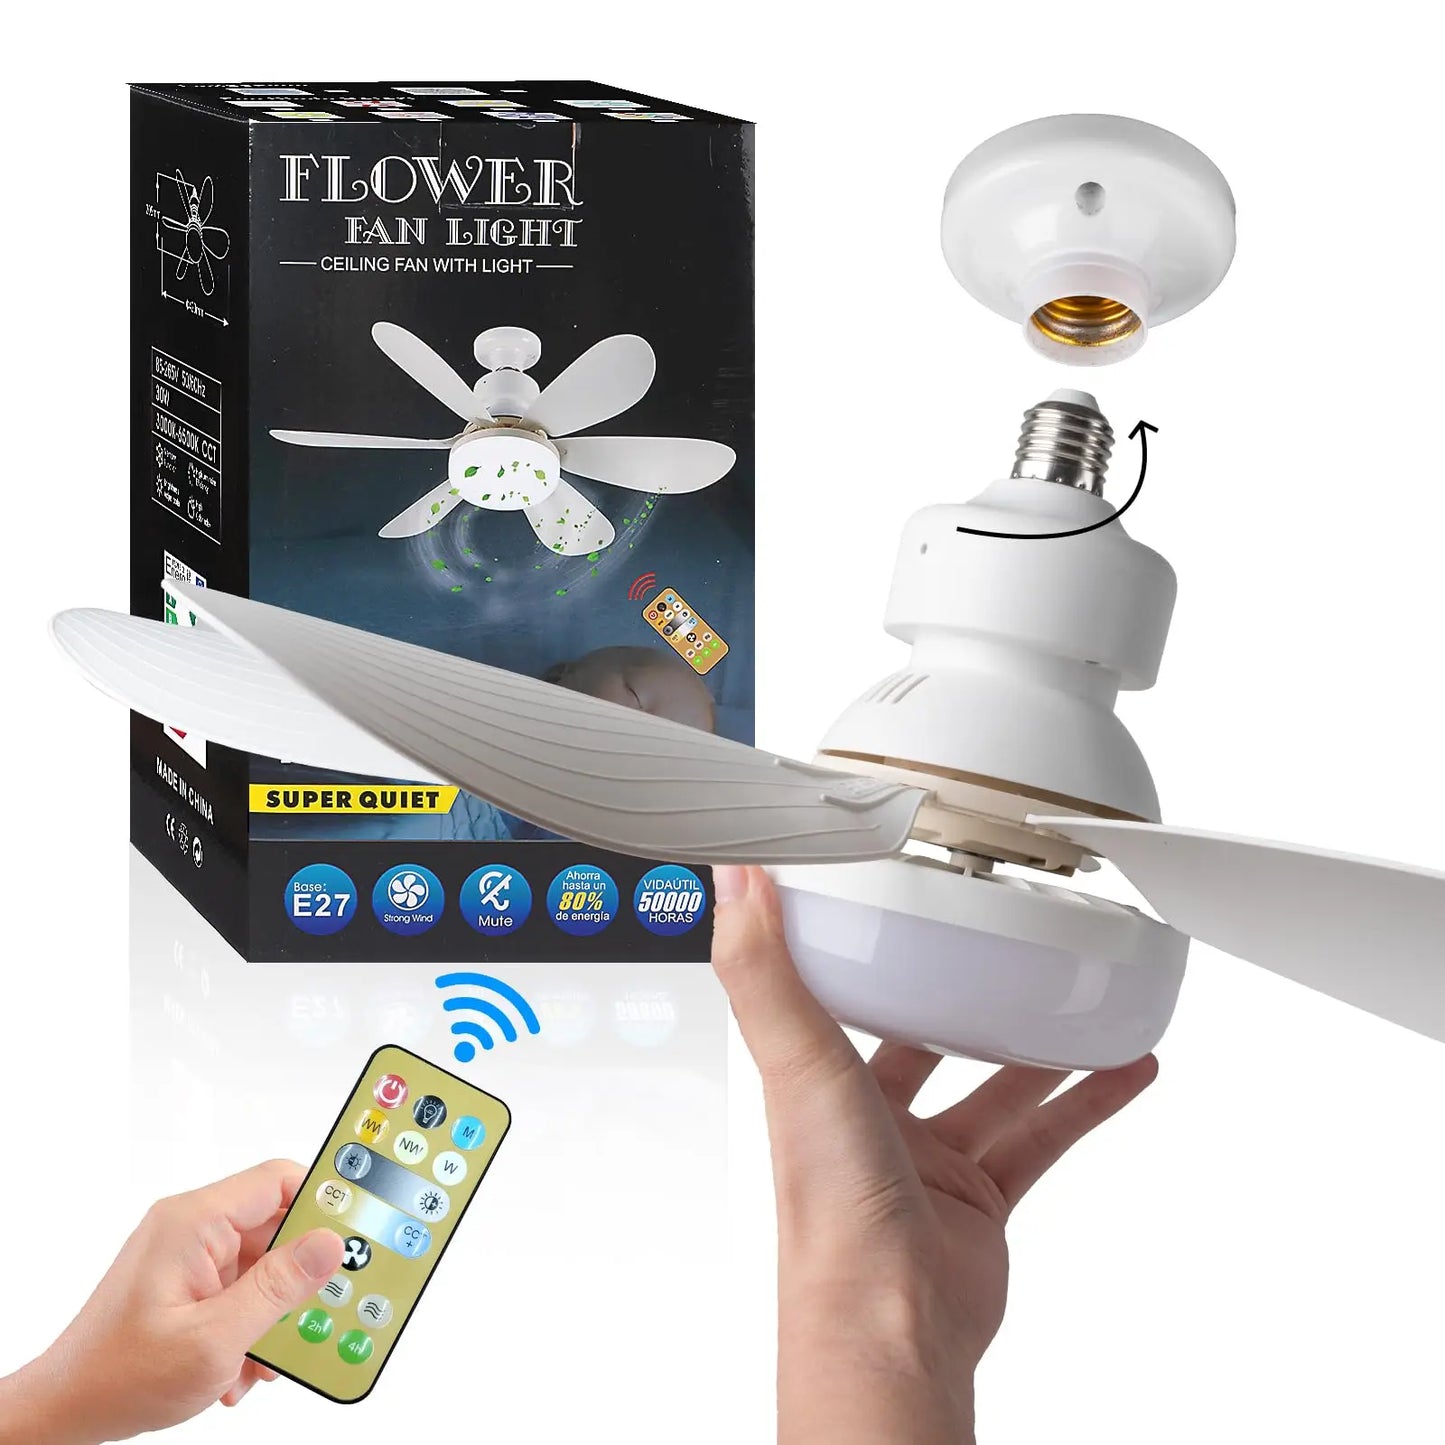 Remote-Controlled LED Ceiling Fan Light for Living Spaces